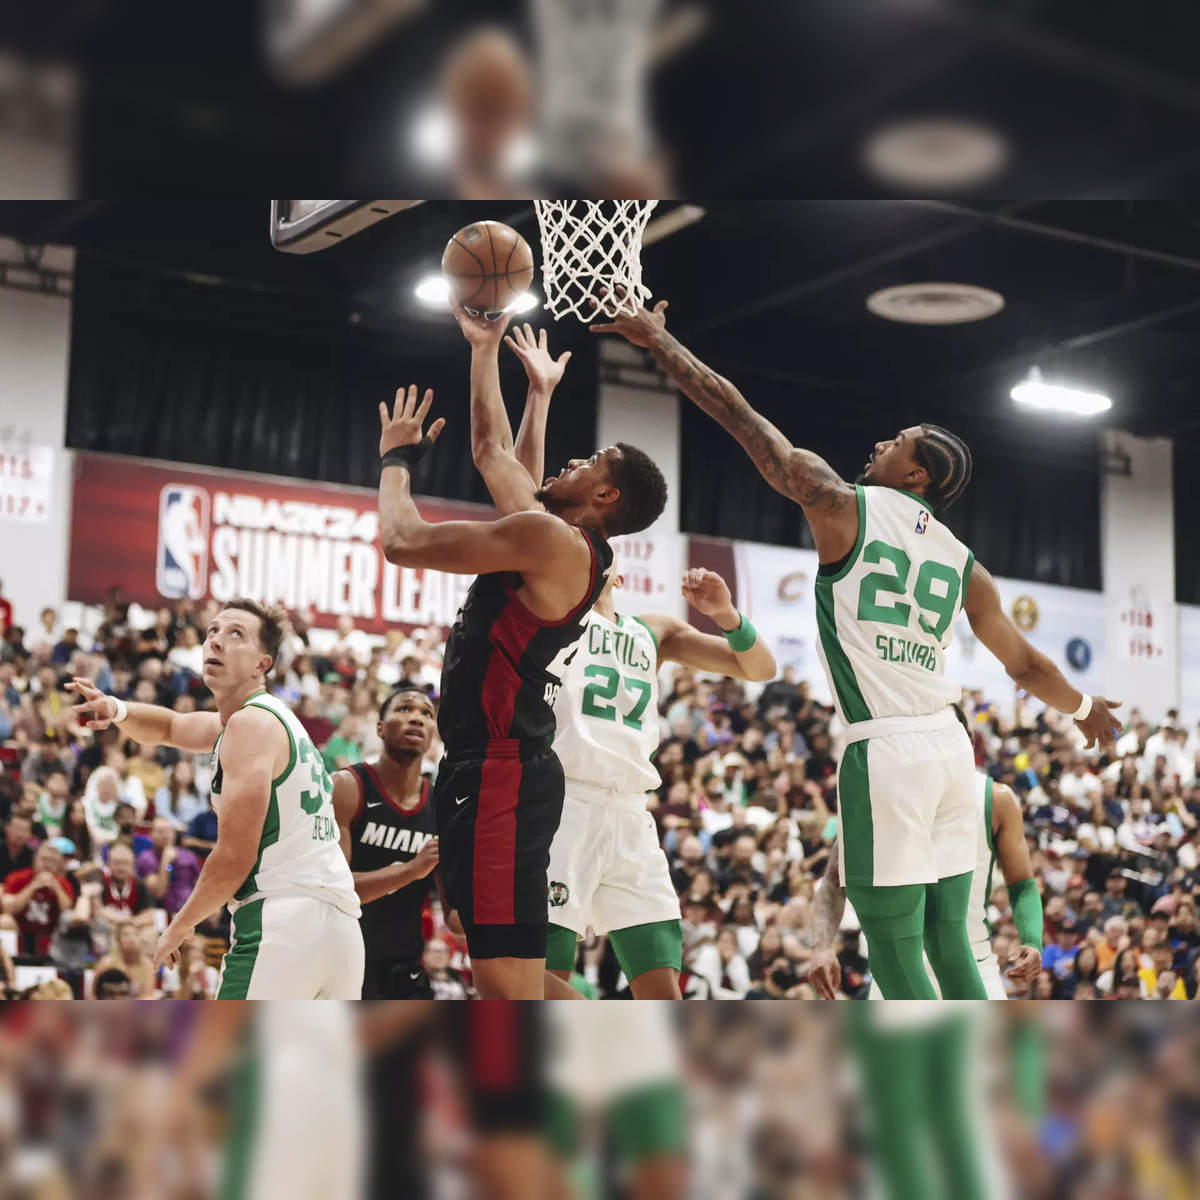 NBA Summer League: Know the best players in the history of the